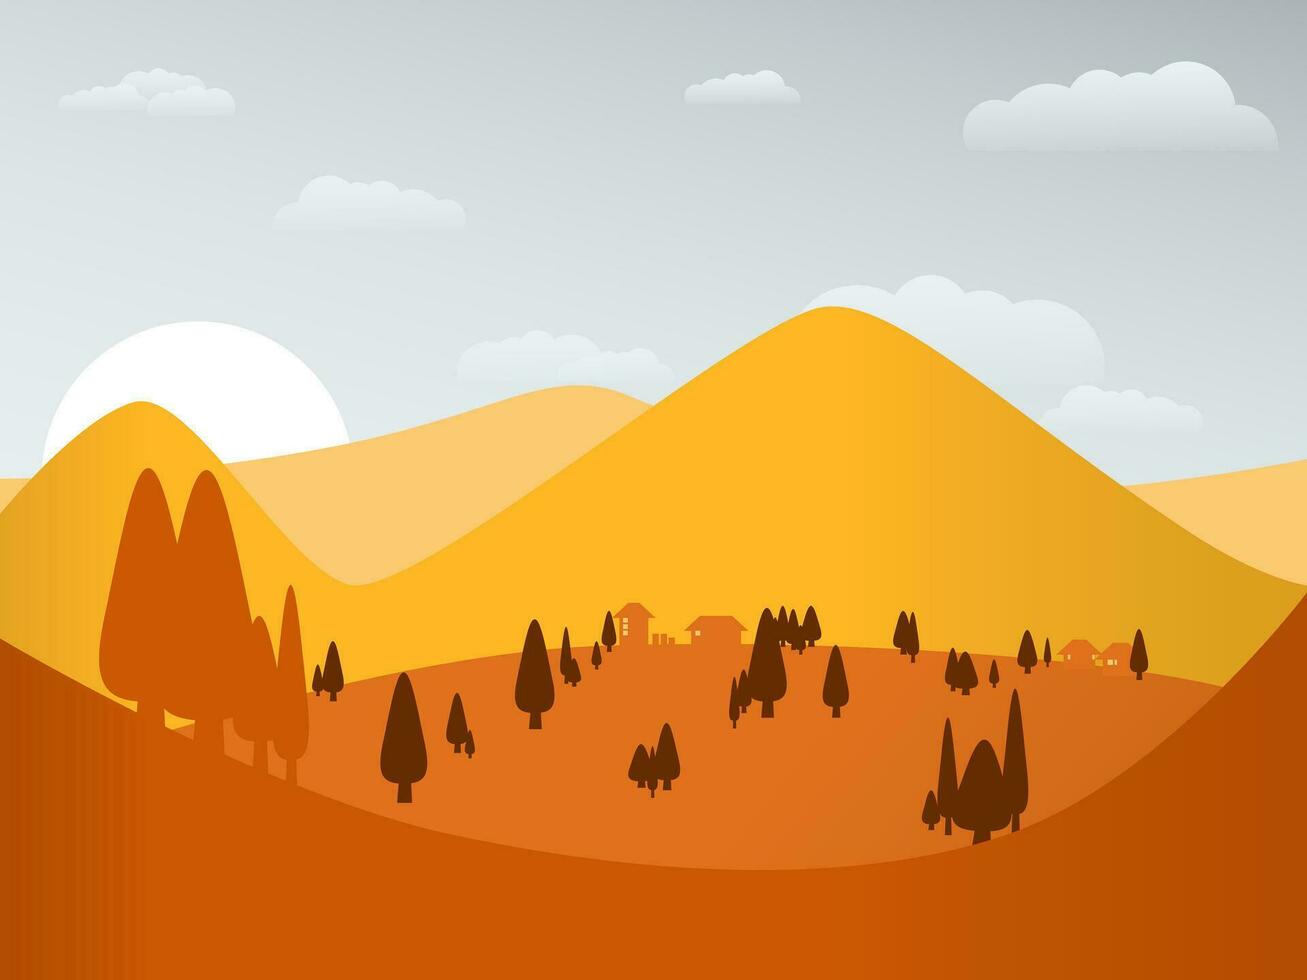 hills scenery landscape in autumn with overcast and cloudy sky vector flat style illustration